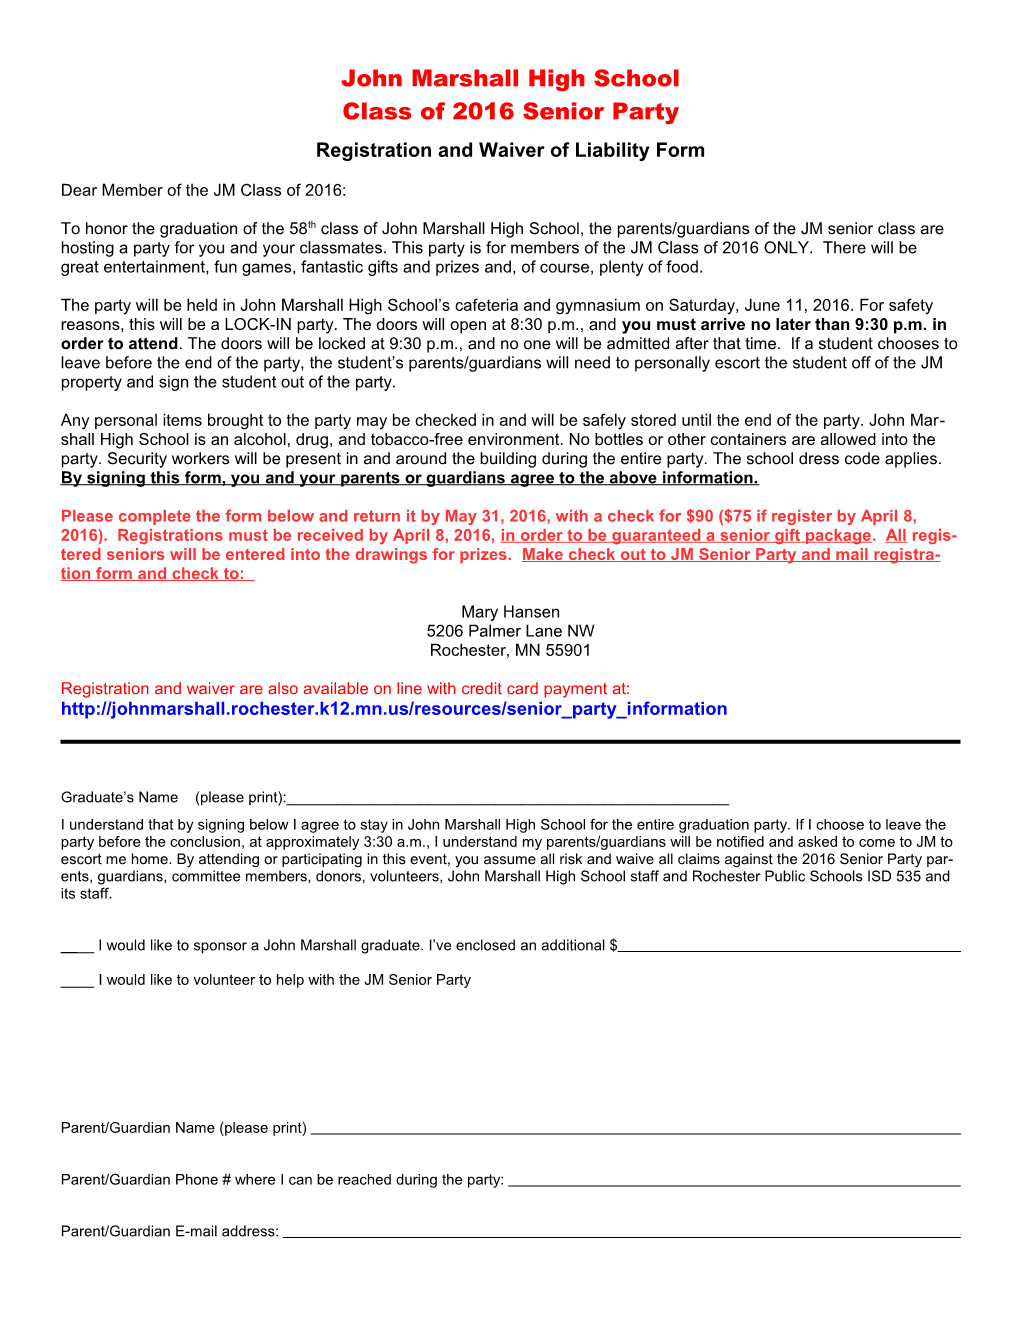 Registration and Waiver of Liability Form